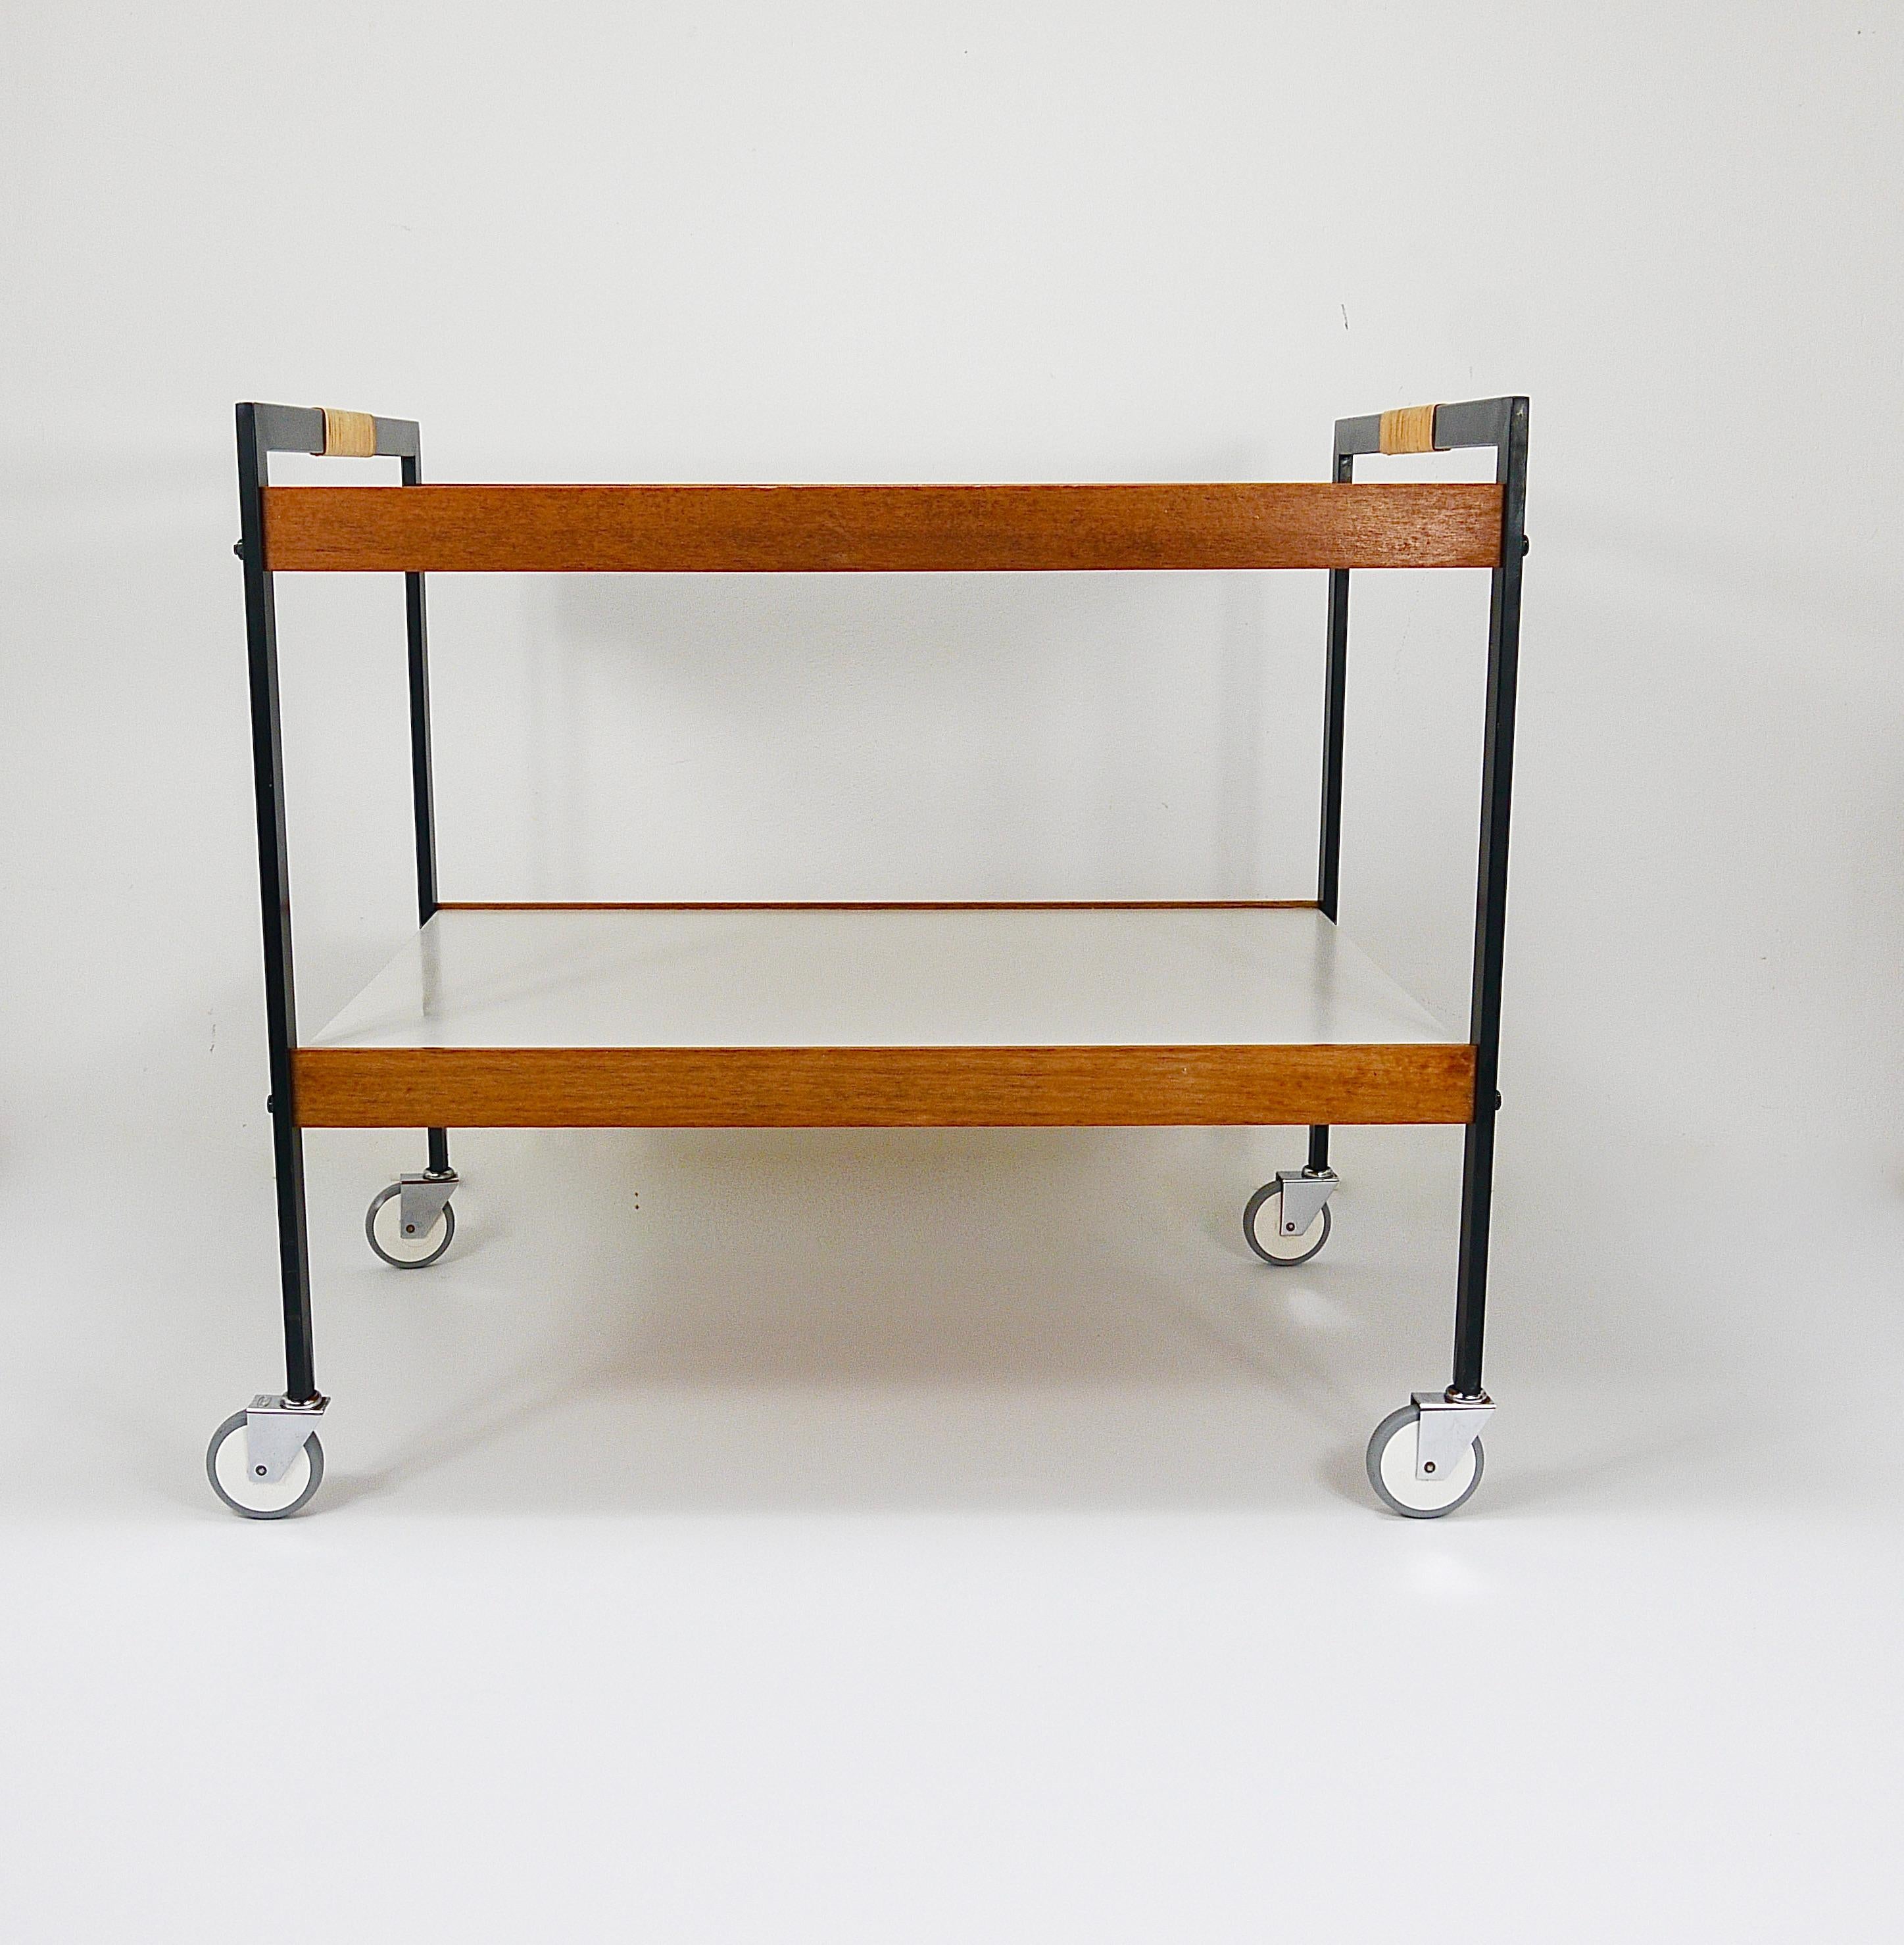 A wonderful example of Minimalist Modernist design, this two-tier bar cart or drinks serving trolley dates back to the 1960s/1970s. Crafted by the workshop Werkstätte Carl Auböck in Vienna, it stands as a beautiful Midcentury piece. The cart